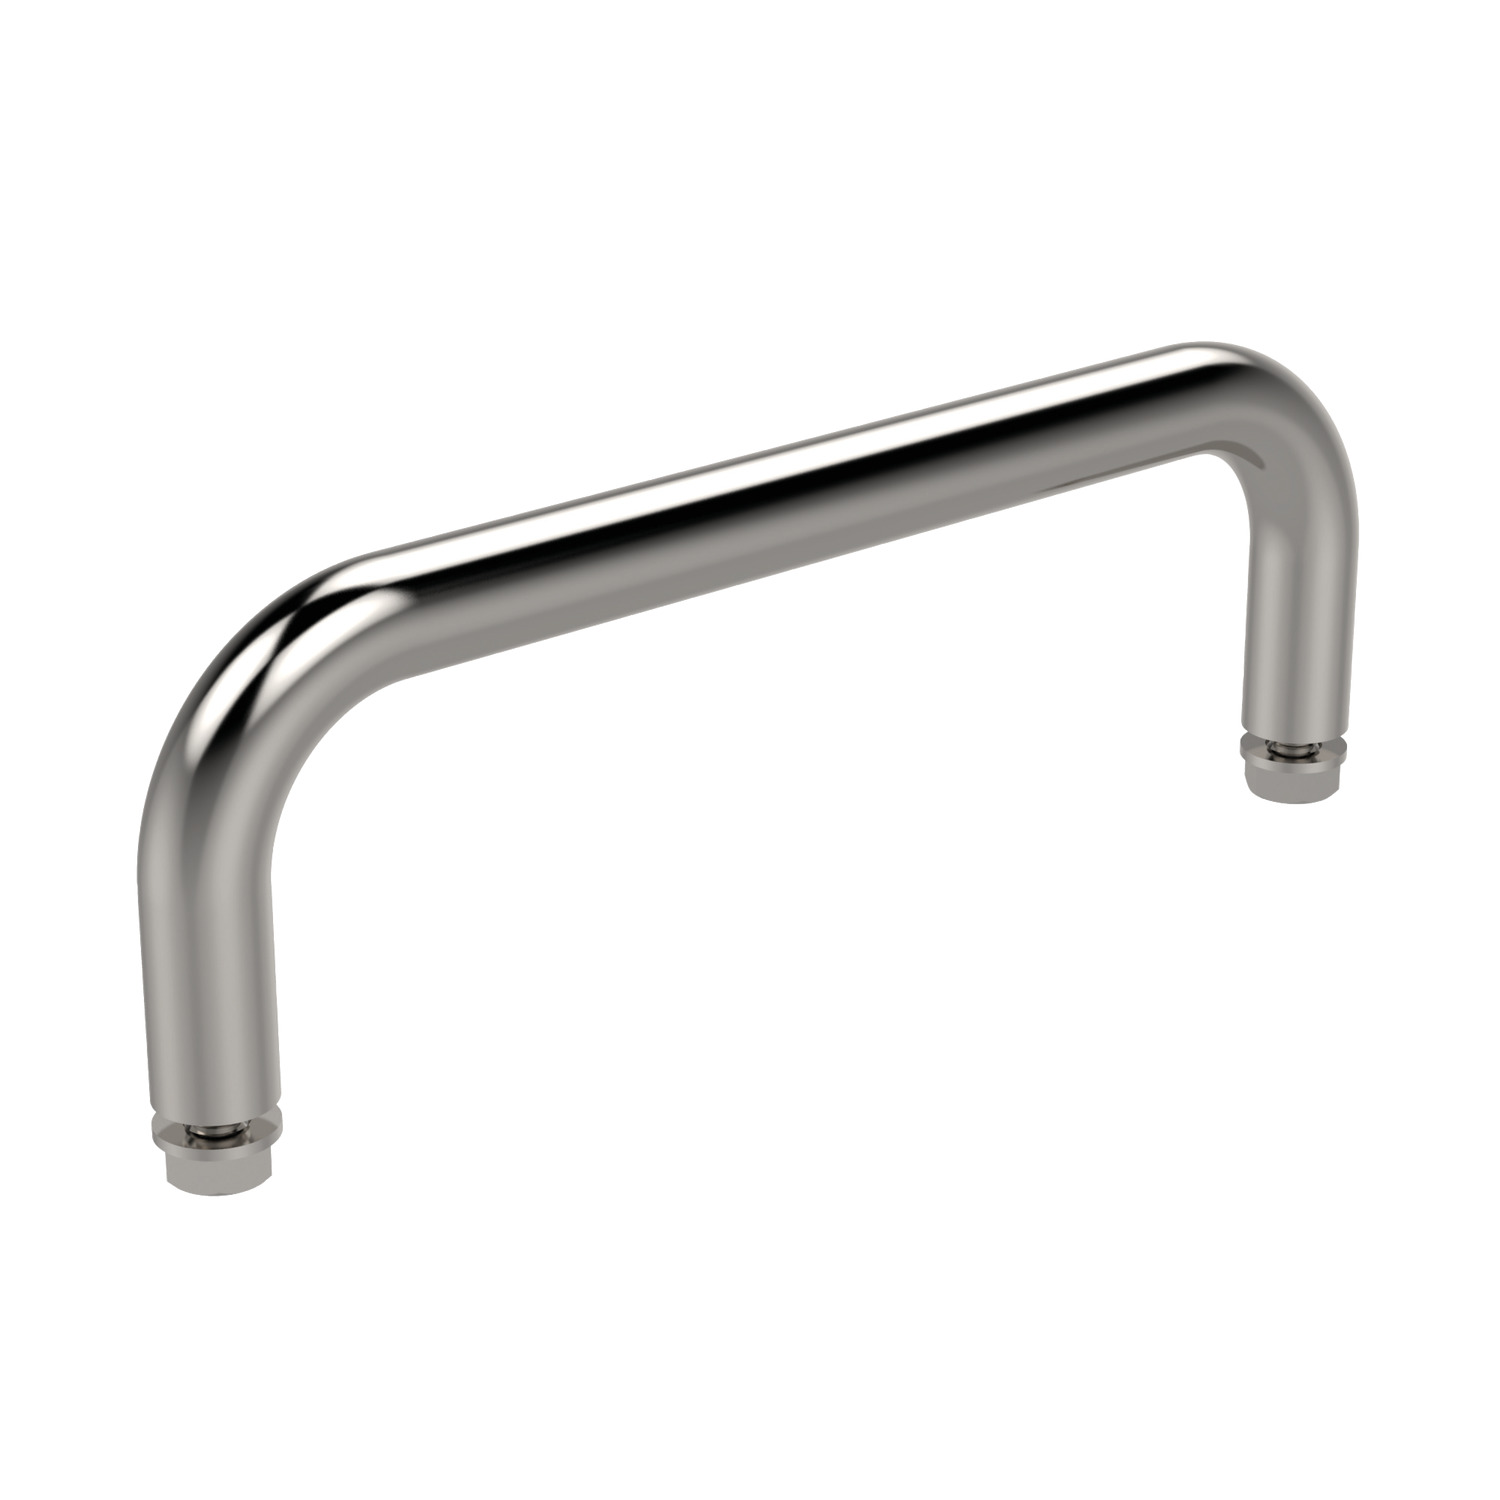 Product 78900, Pull Handles - Bar Type stainless steel / 